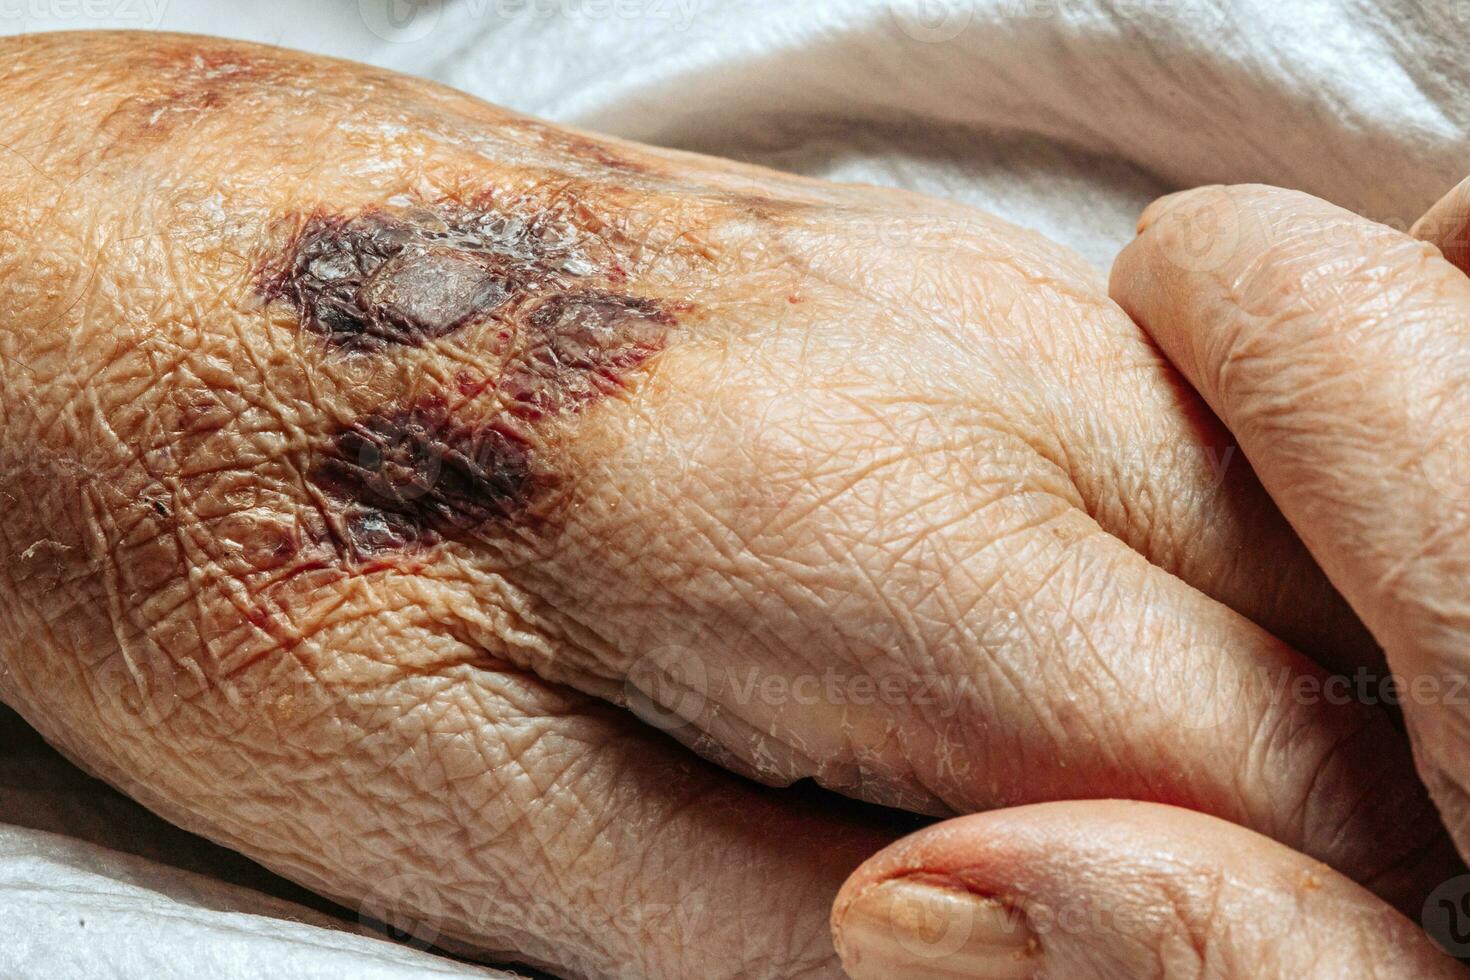 A bruise on the hand of an elderly person. Known as senile purpura. Caused by the fragility of the skin and blood vessels in old age. Elderly care photo